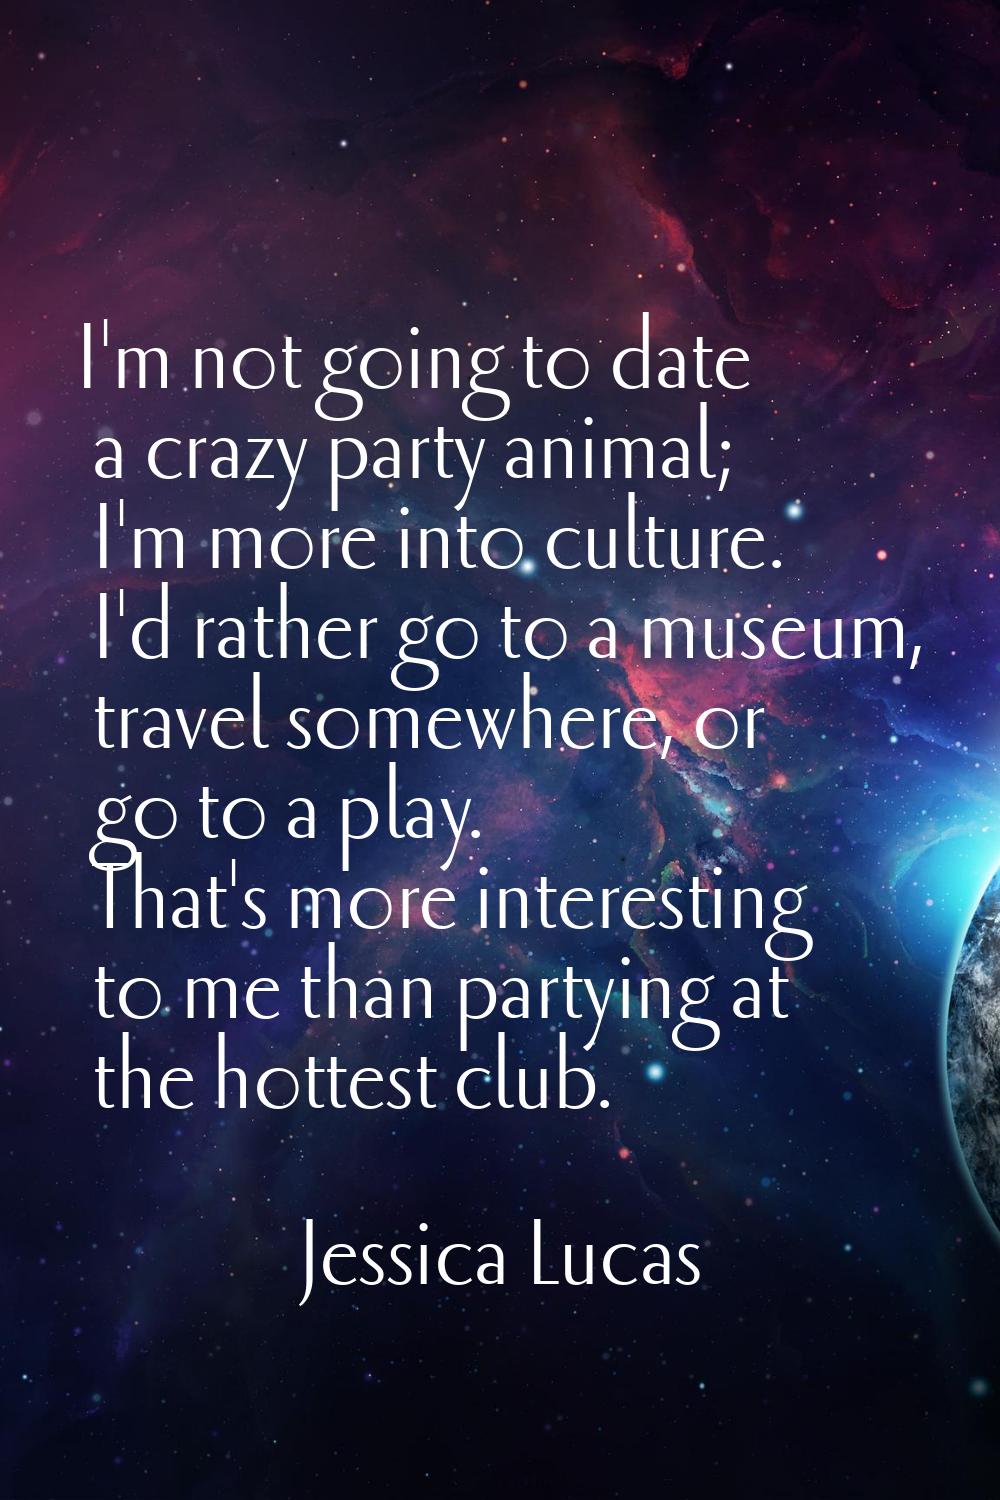 I'm not going to date a crazy party animal; I'm more into culture. I'd rather go to a museum, trave